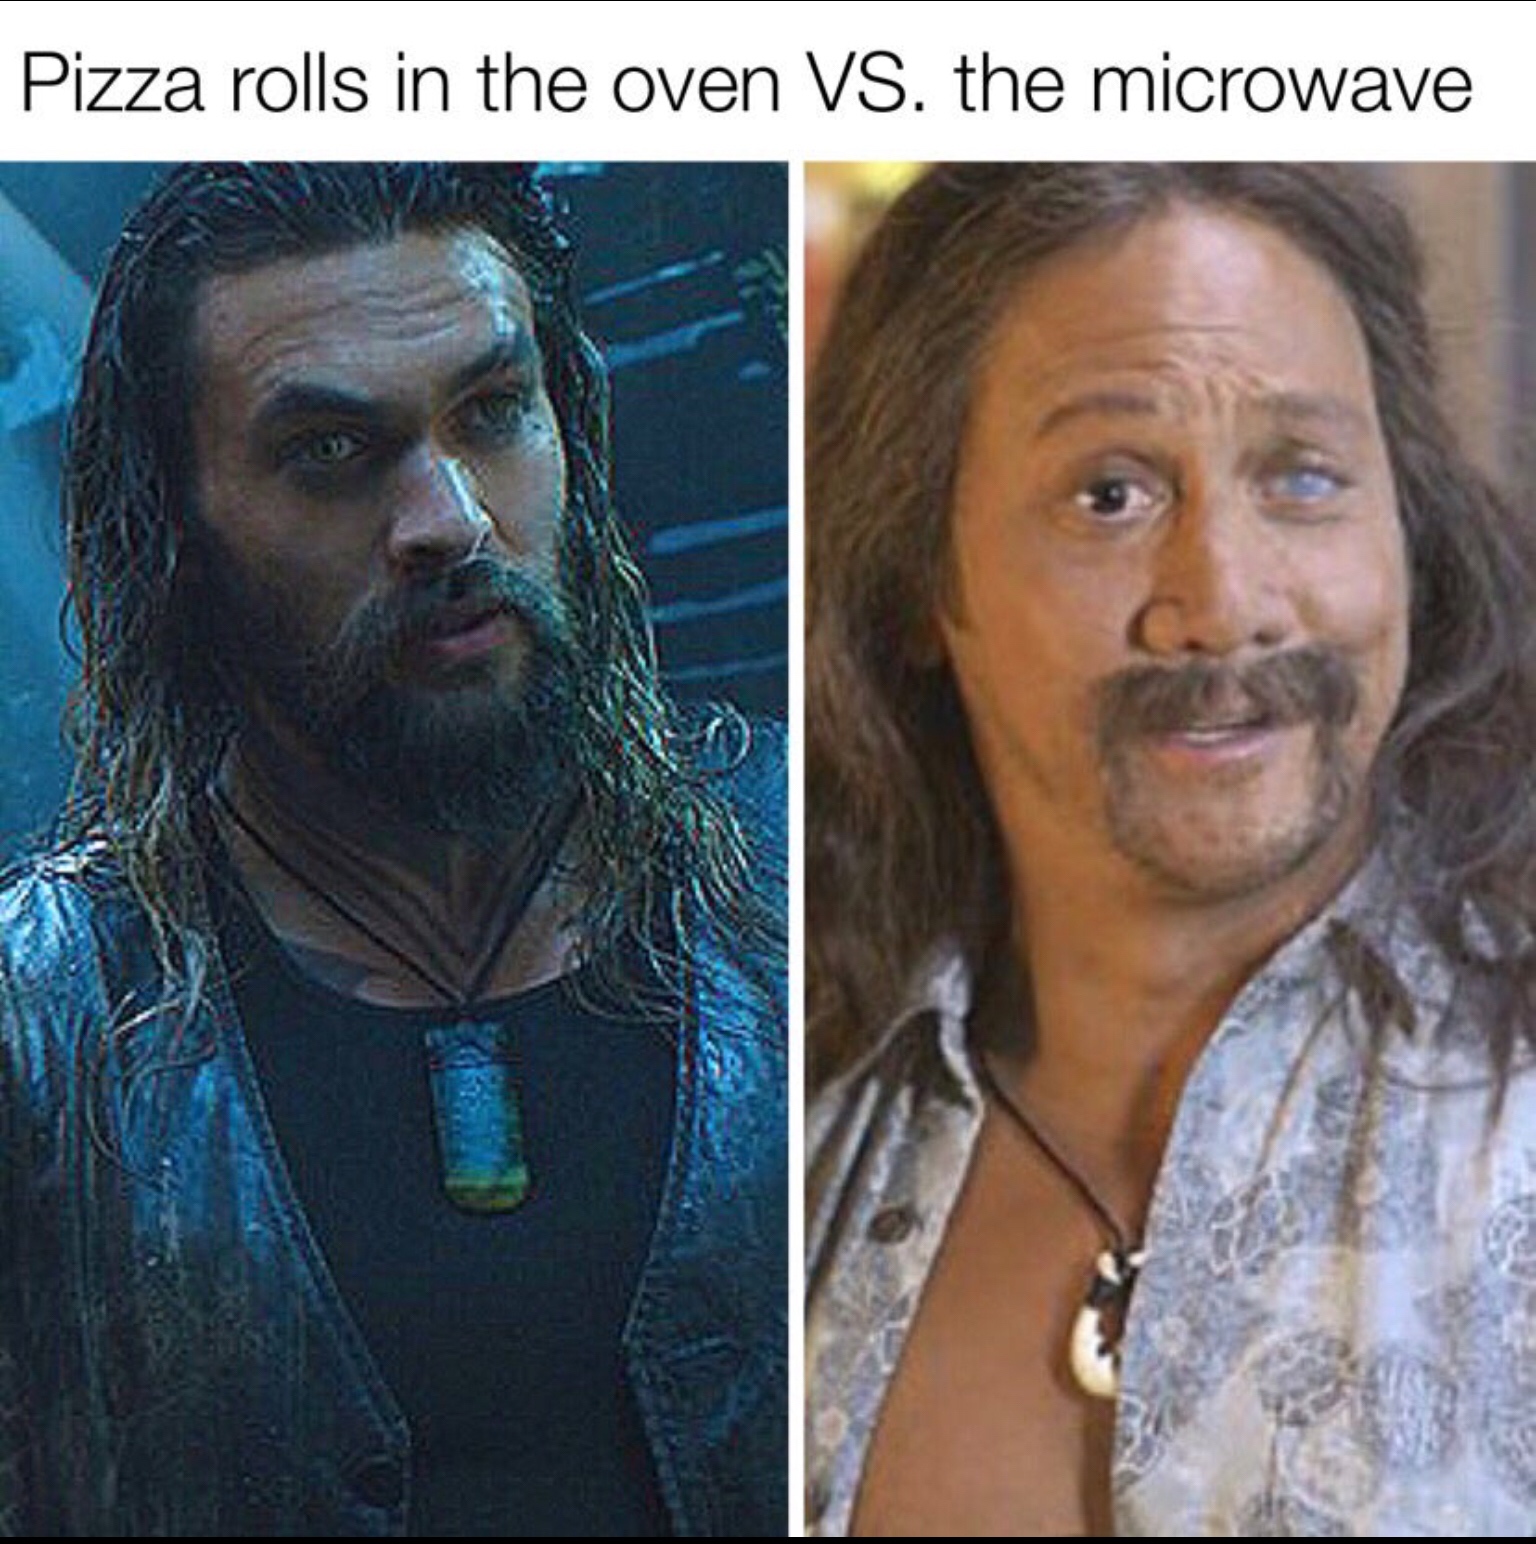 rob schneider 50 first dates - Pizza rolls in the oven Vs. the microwave